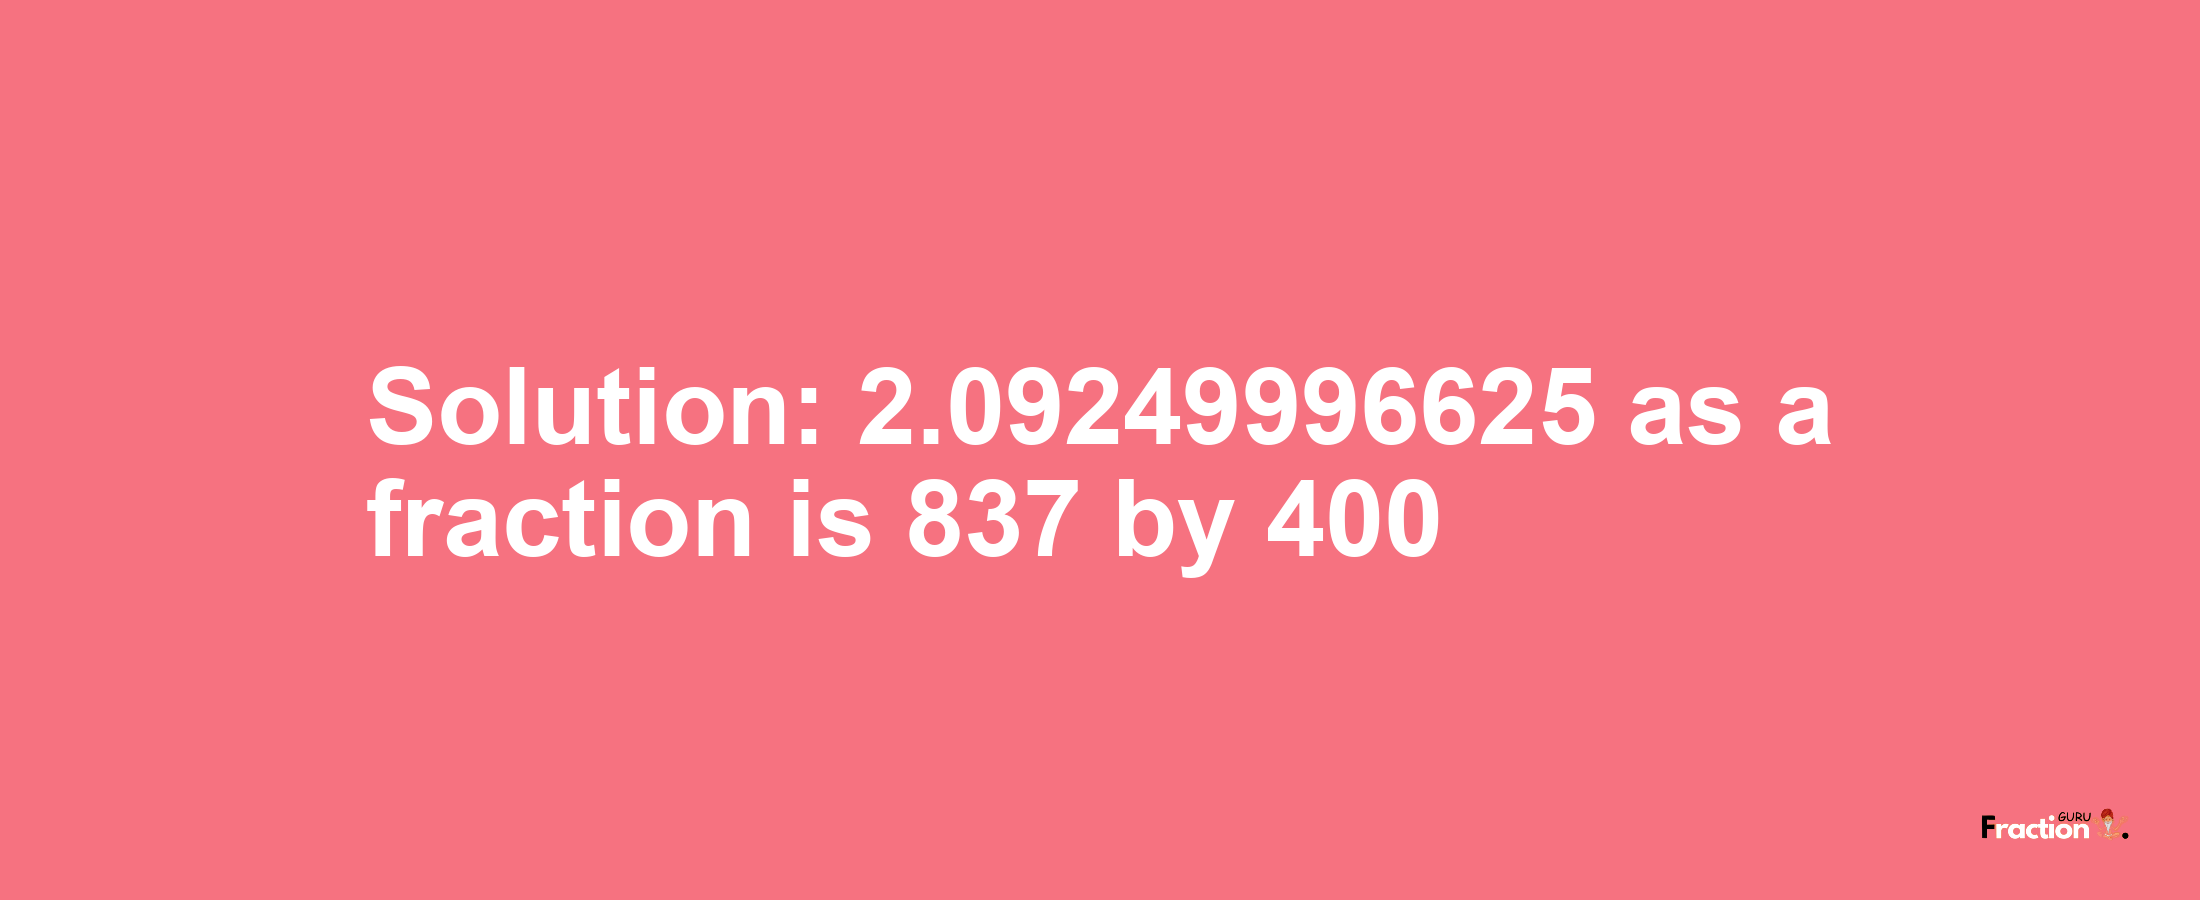 Solution:2.09249996625 as a fraction is 837/400